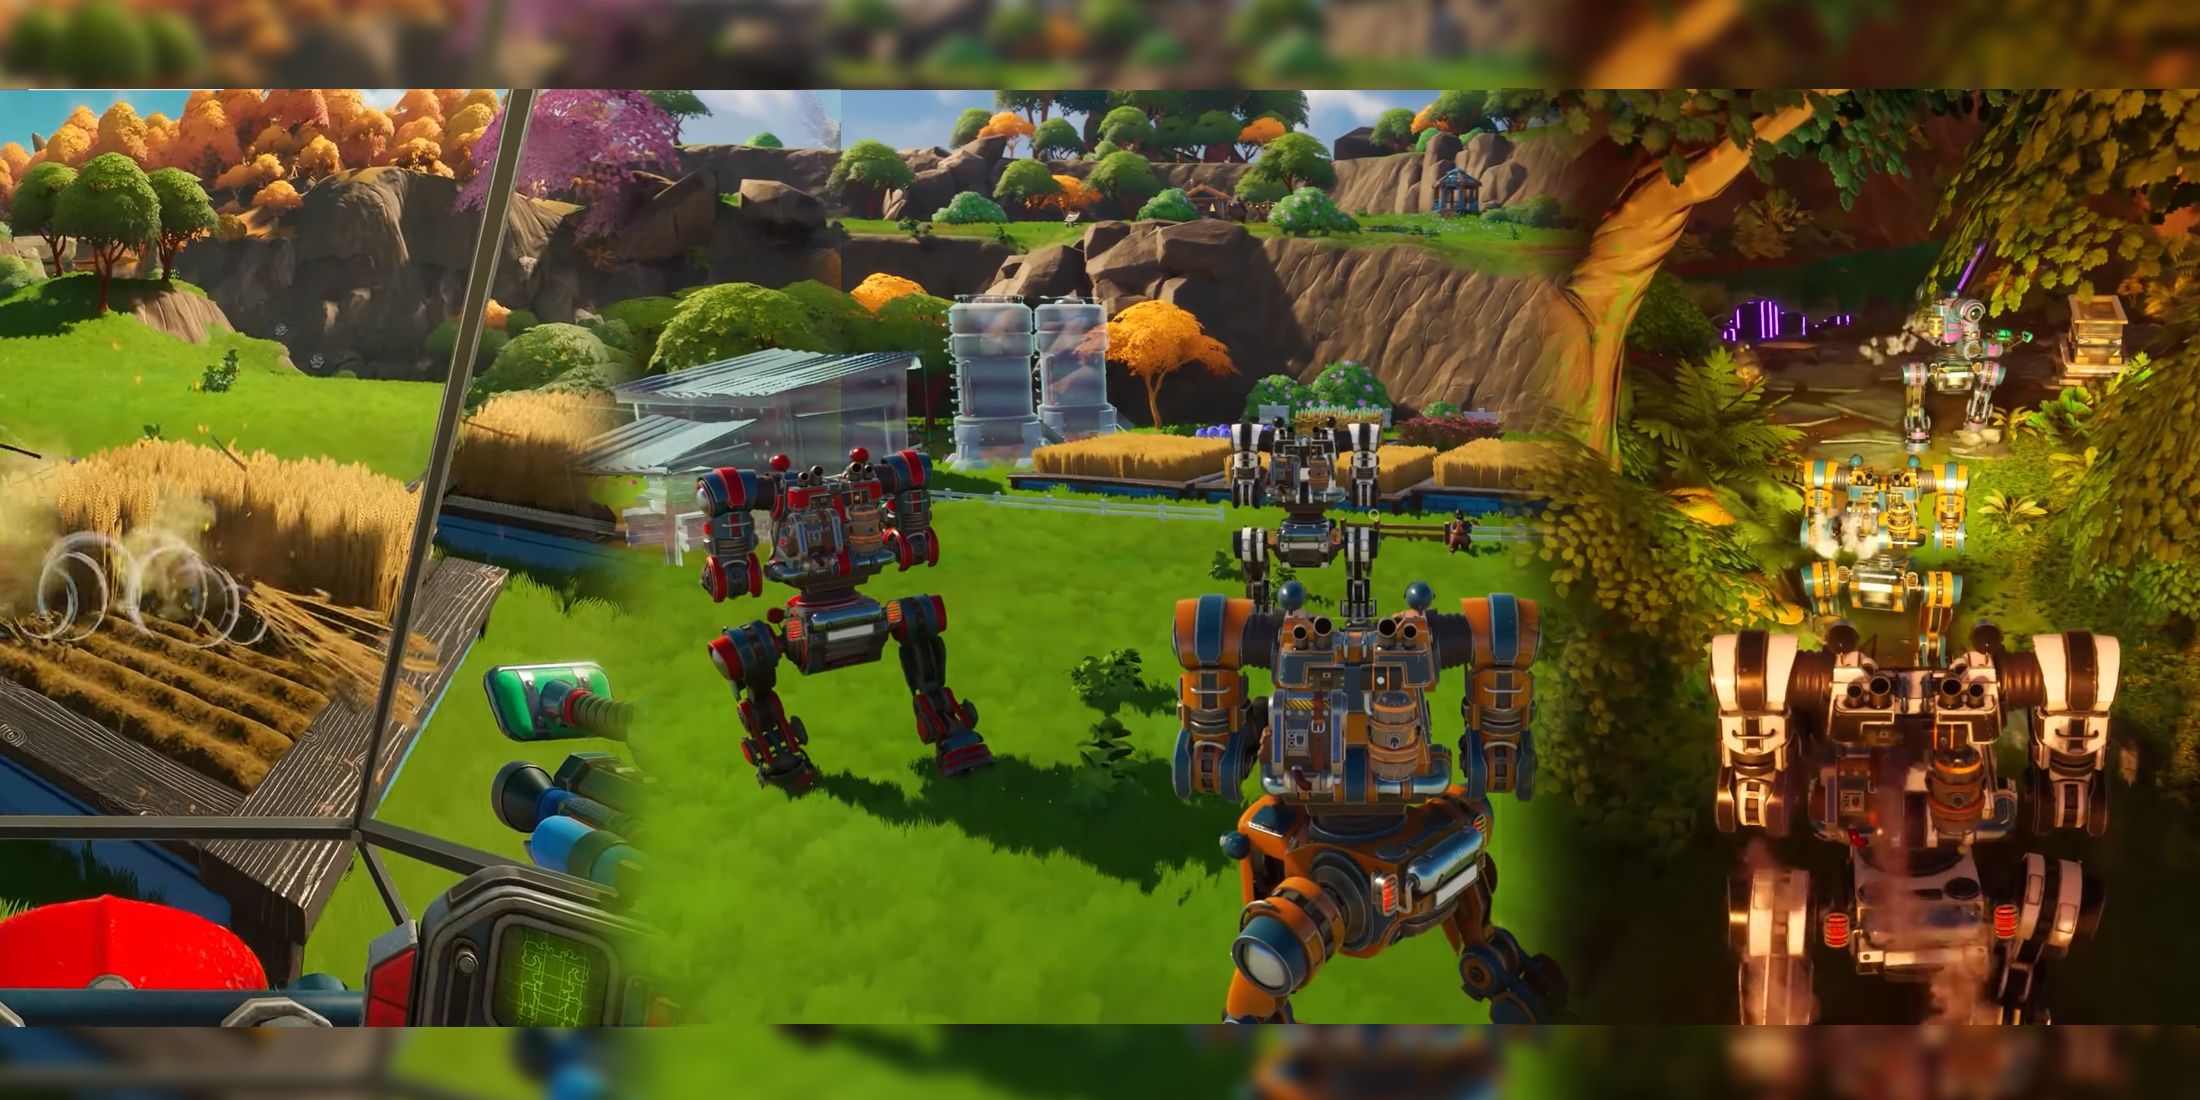 Lightyear Frontier single player and co-op farming sim control a mech while farming